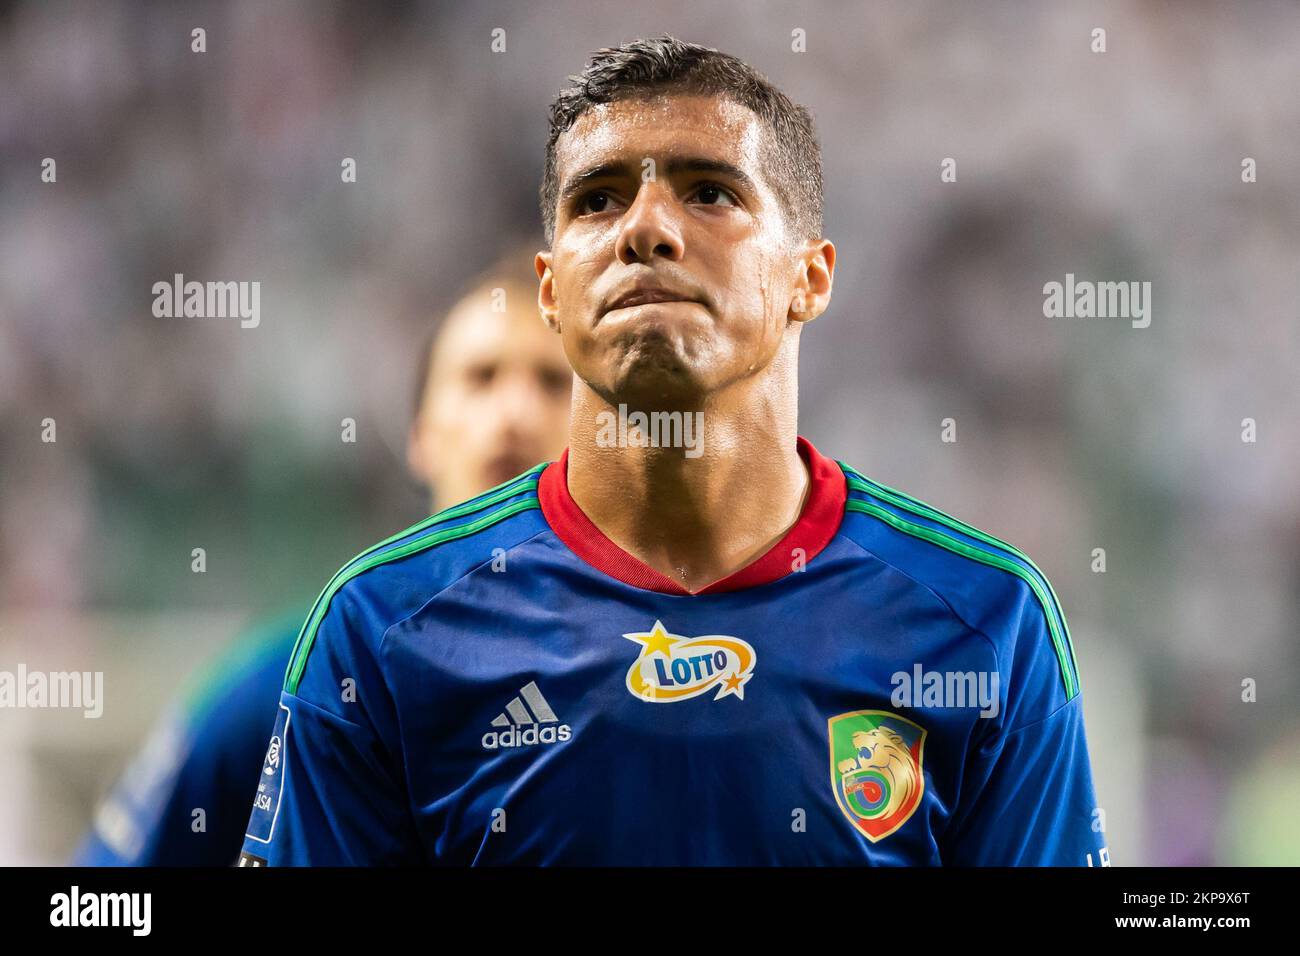 Carlos julio martinez hi-res stock photography and images - Alamy